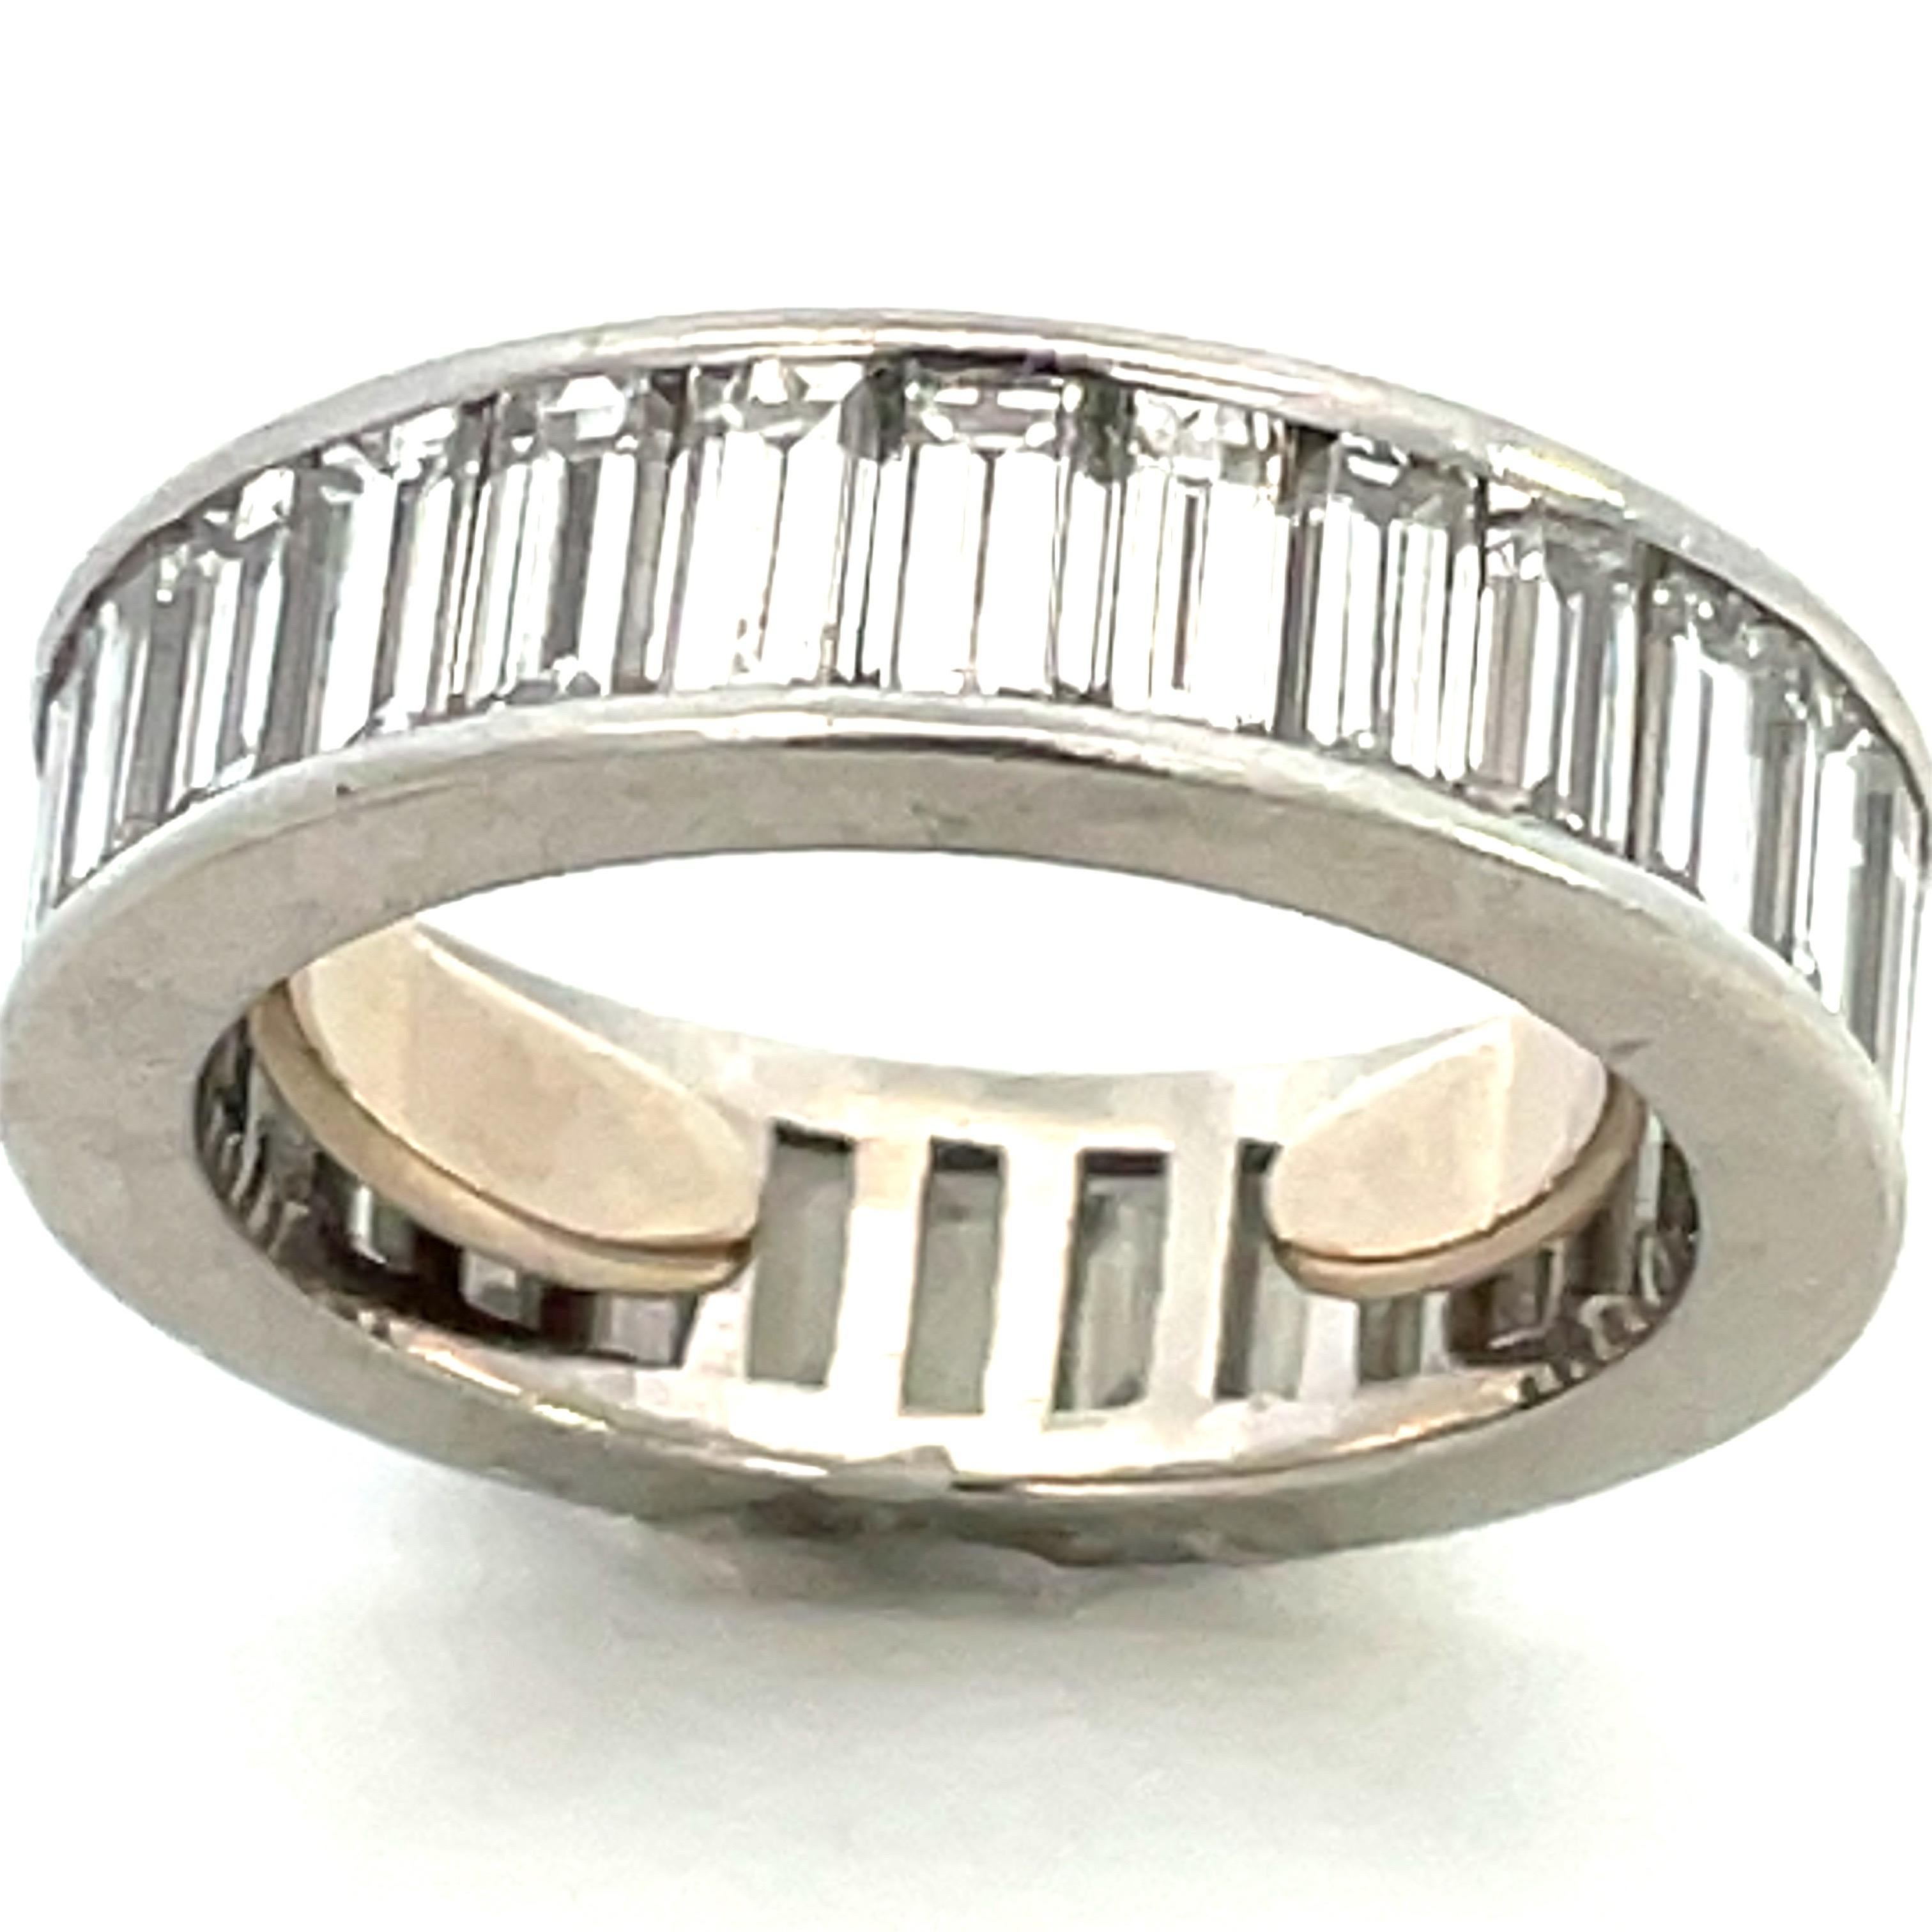 A classic because of the style: a single row of large, clean, white baguette diamonds encircling the finger.  The secret surprise here is the ring’s size:  with the interior sizing collar as pictured, it’s a size 7, a wonderfully average size for a